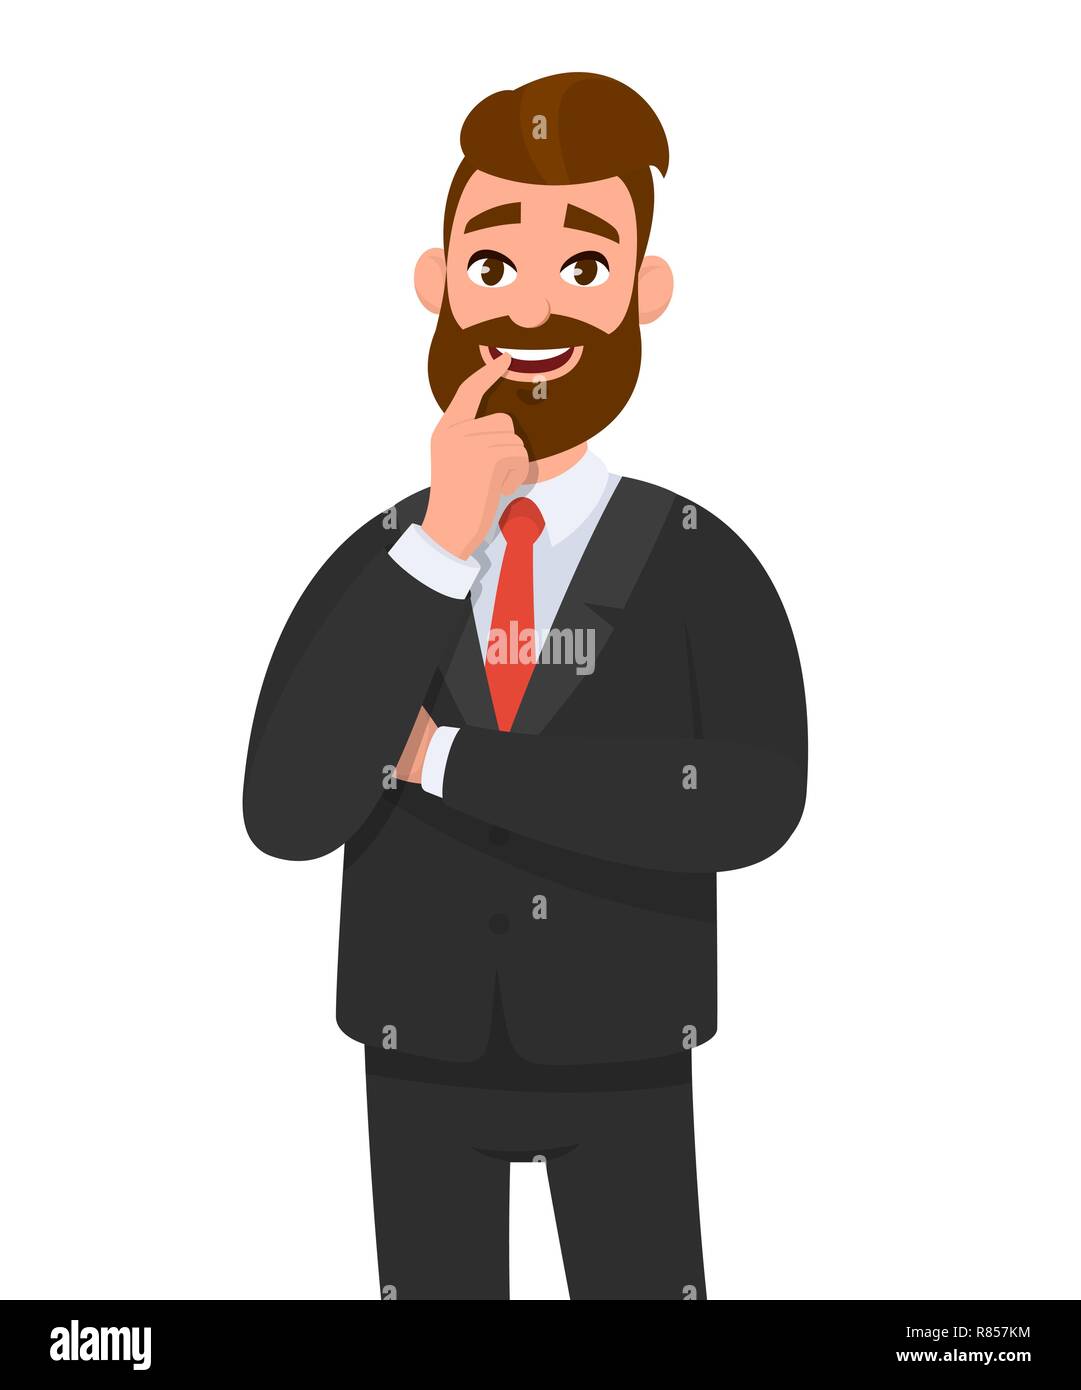 Happy young businessman holding index finger on mouth while crossed arm pose. Emotion and body language concept in cartoon style vector illustration. Stock Vector